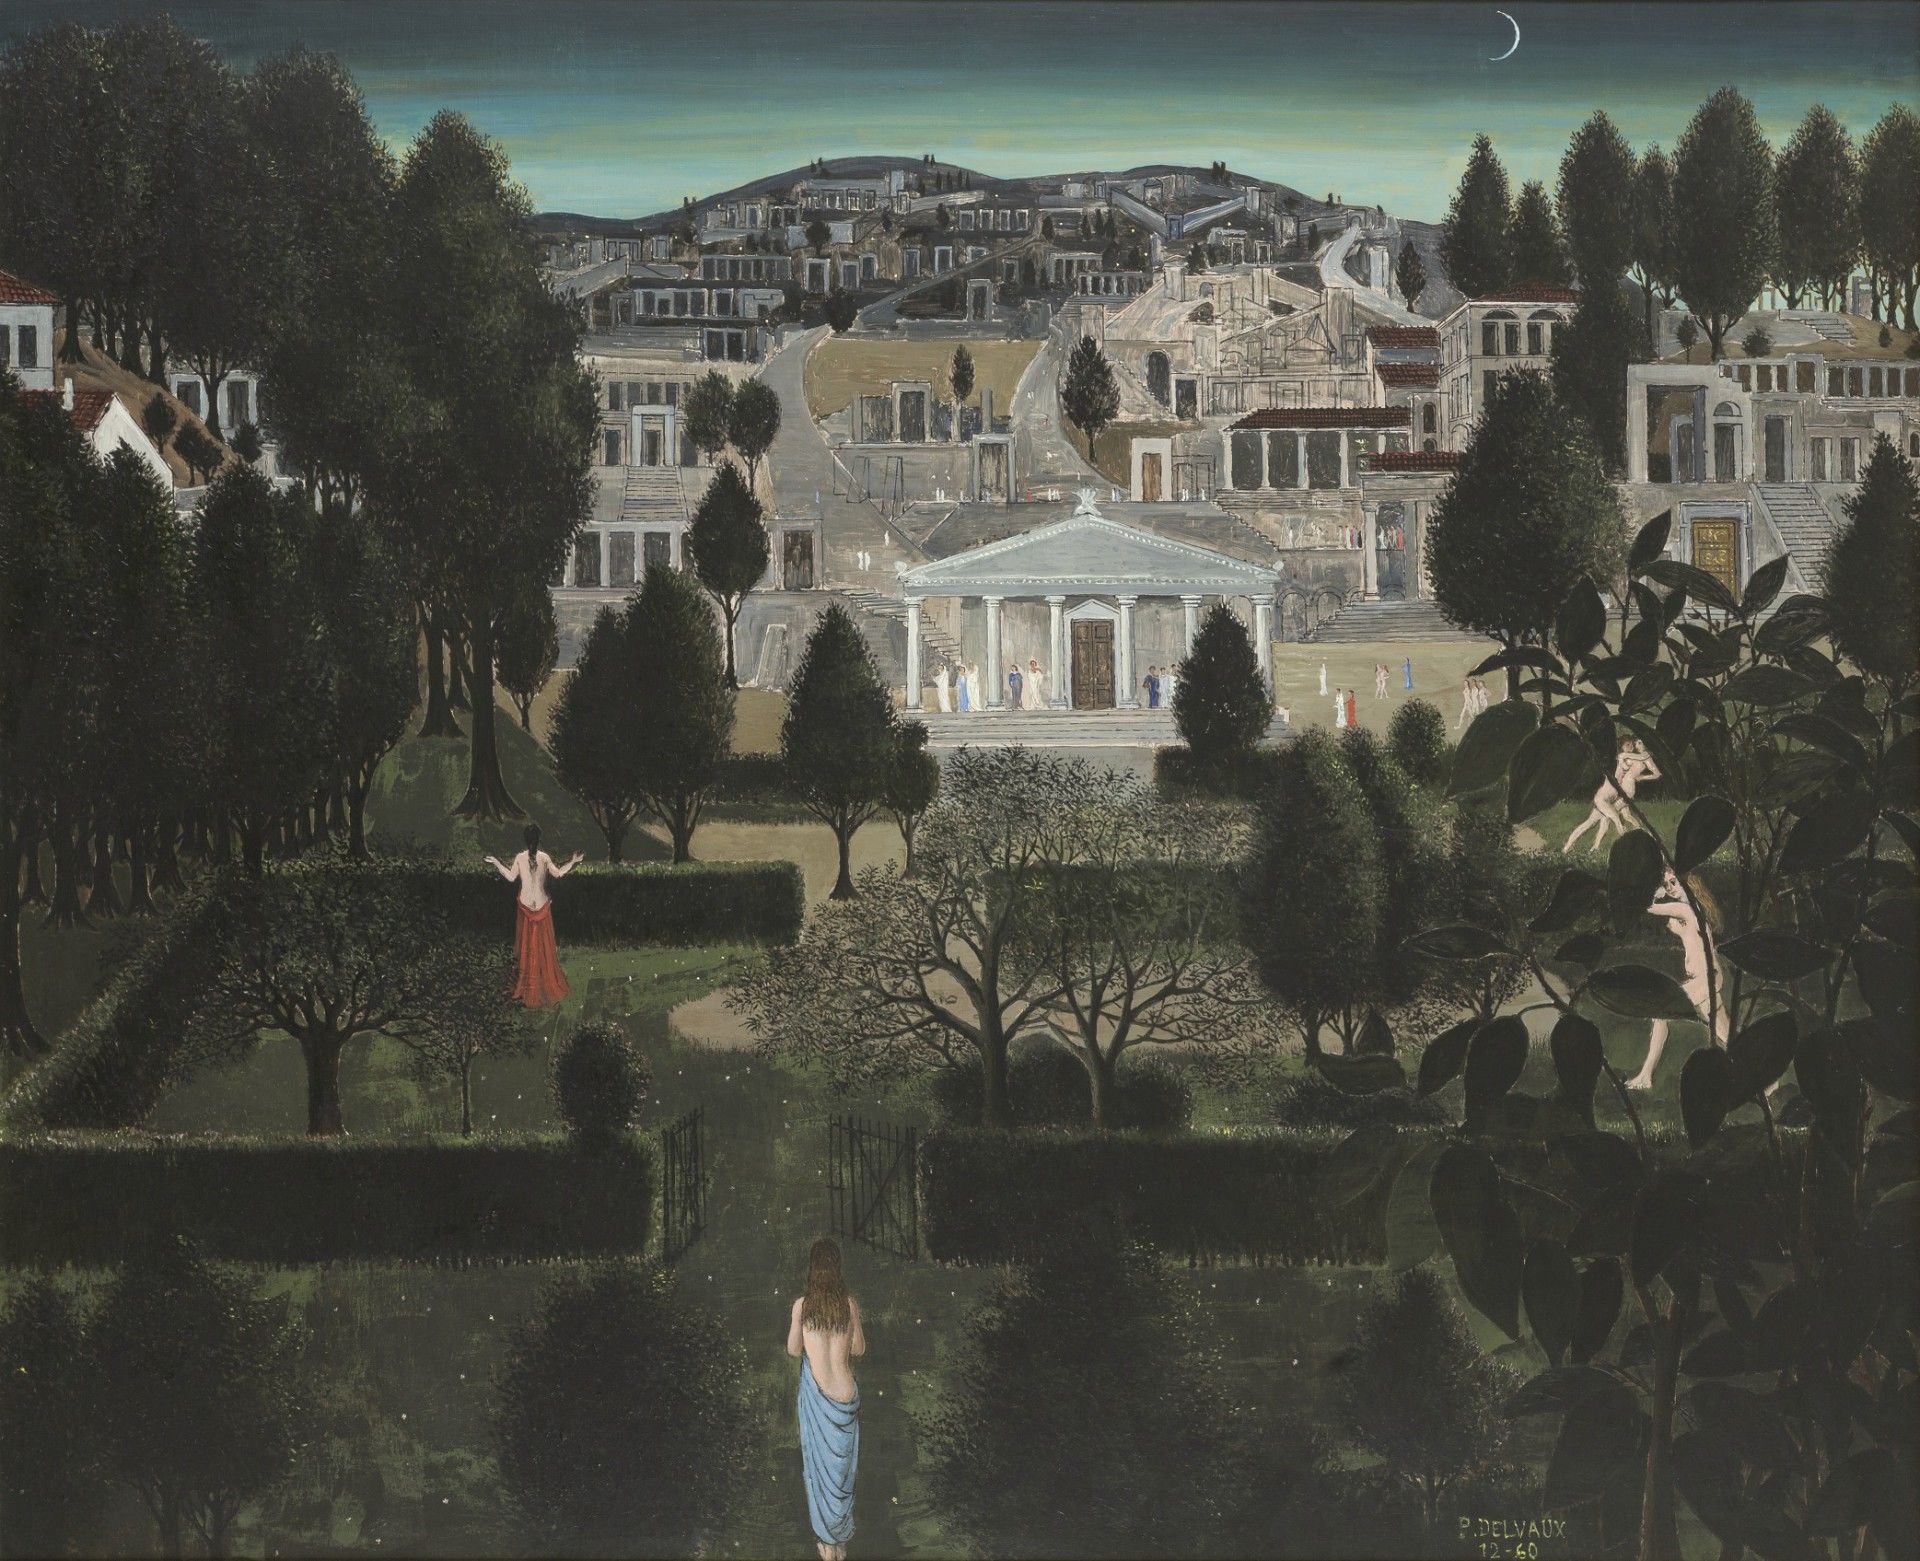 Paul Delvaux’s painting the Gardens of Alexandria